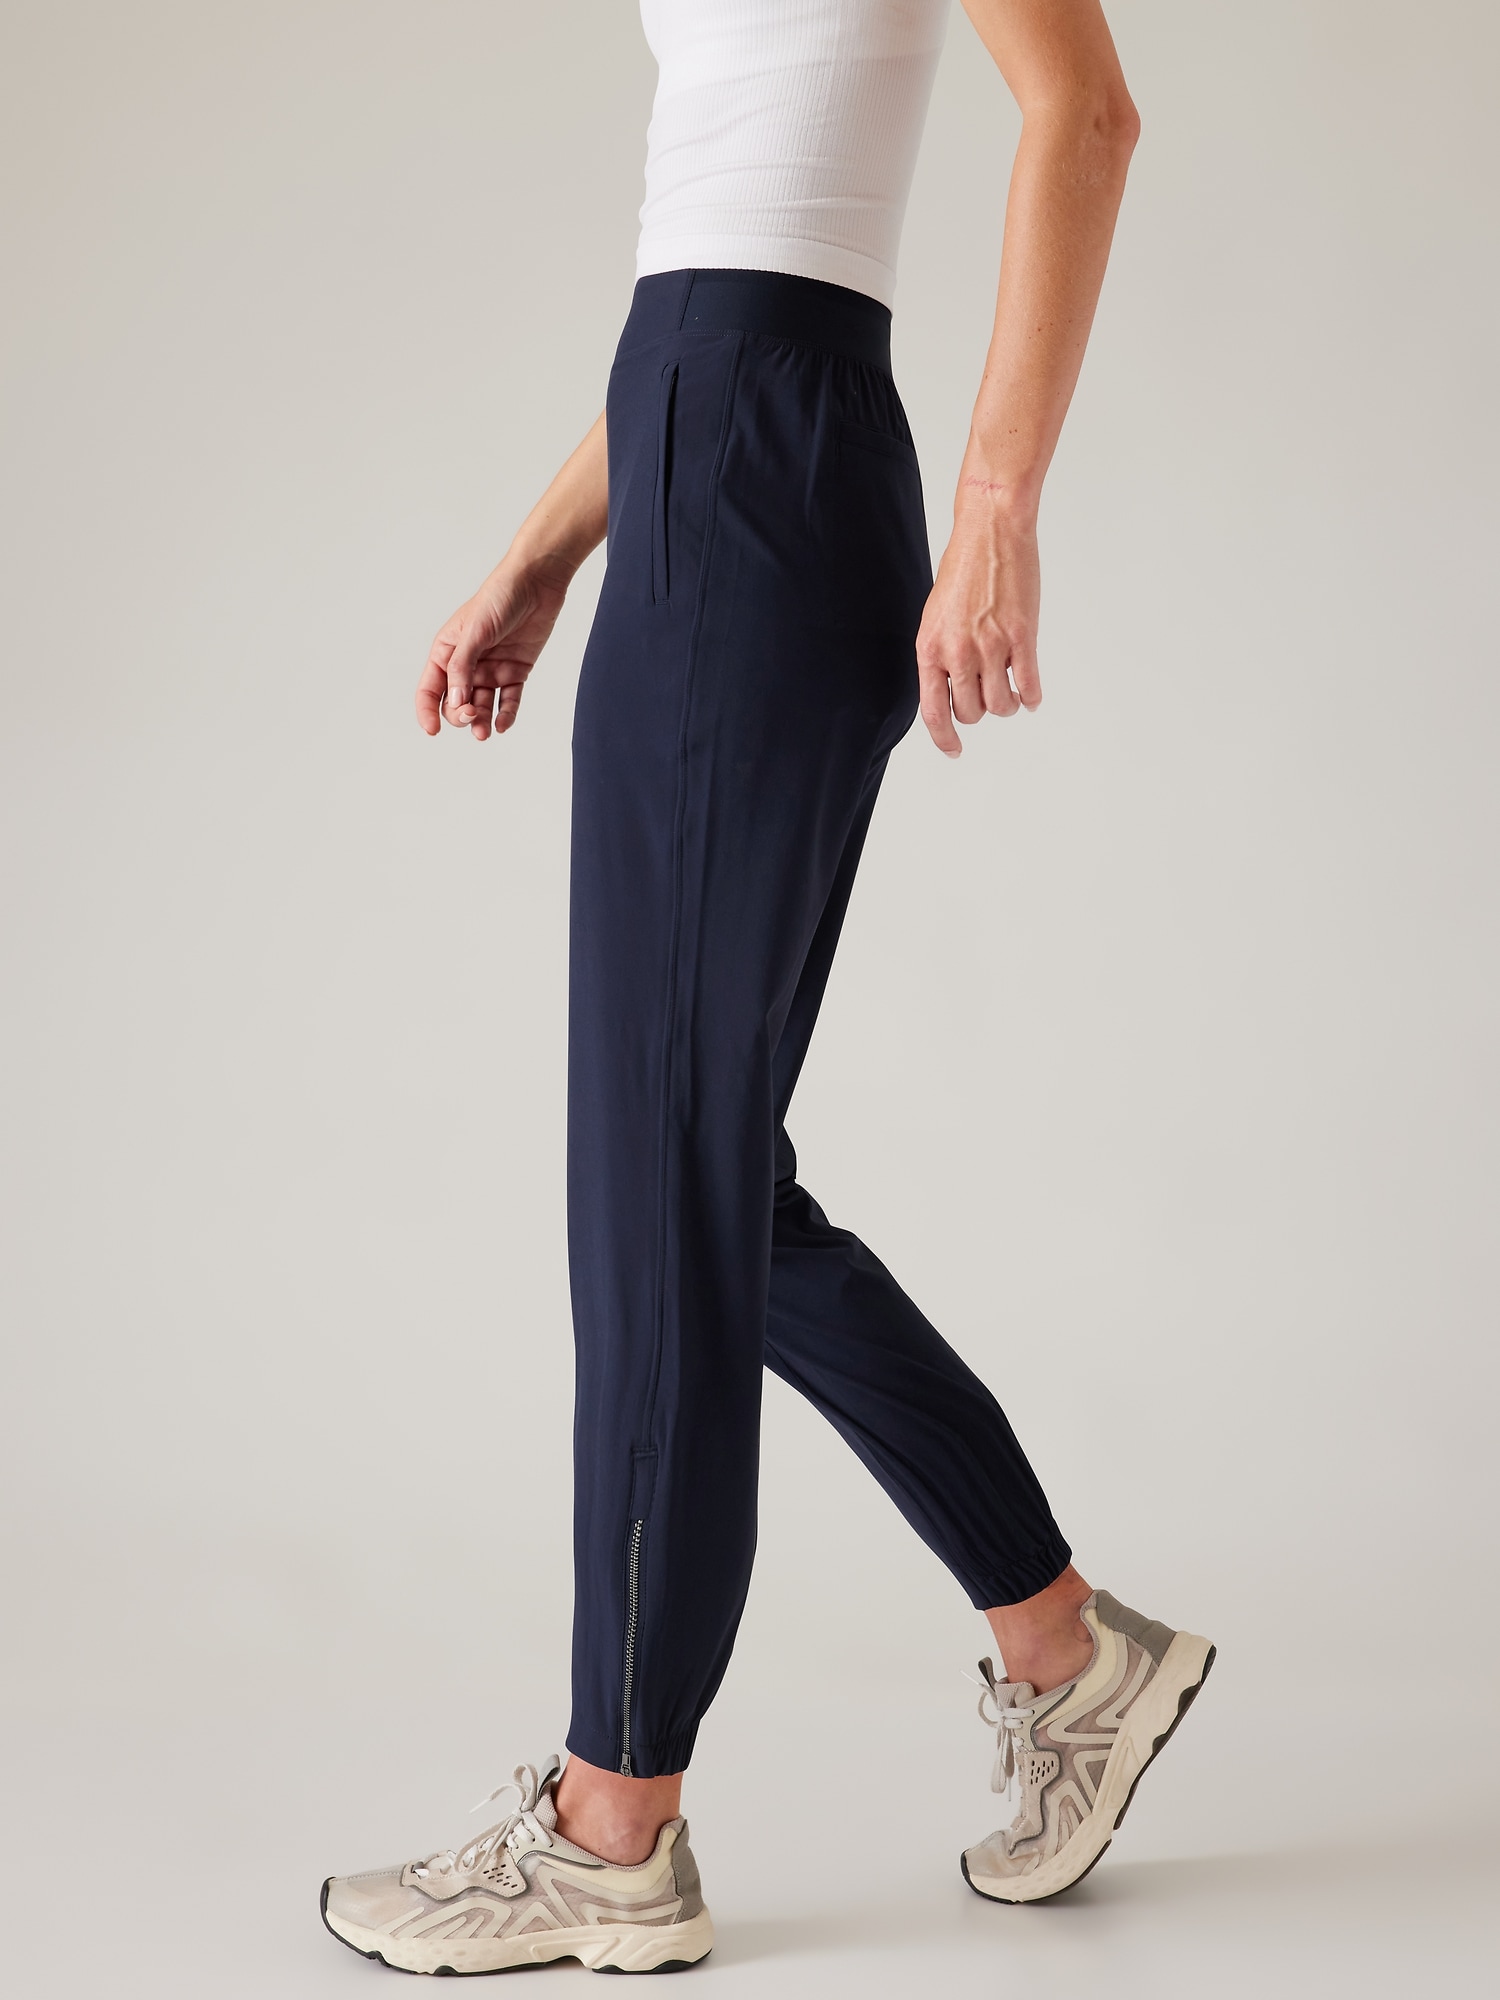 product photo  Pants for women, Athleta outfit, Printed jogger pants